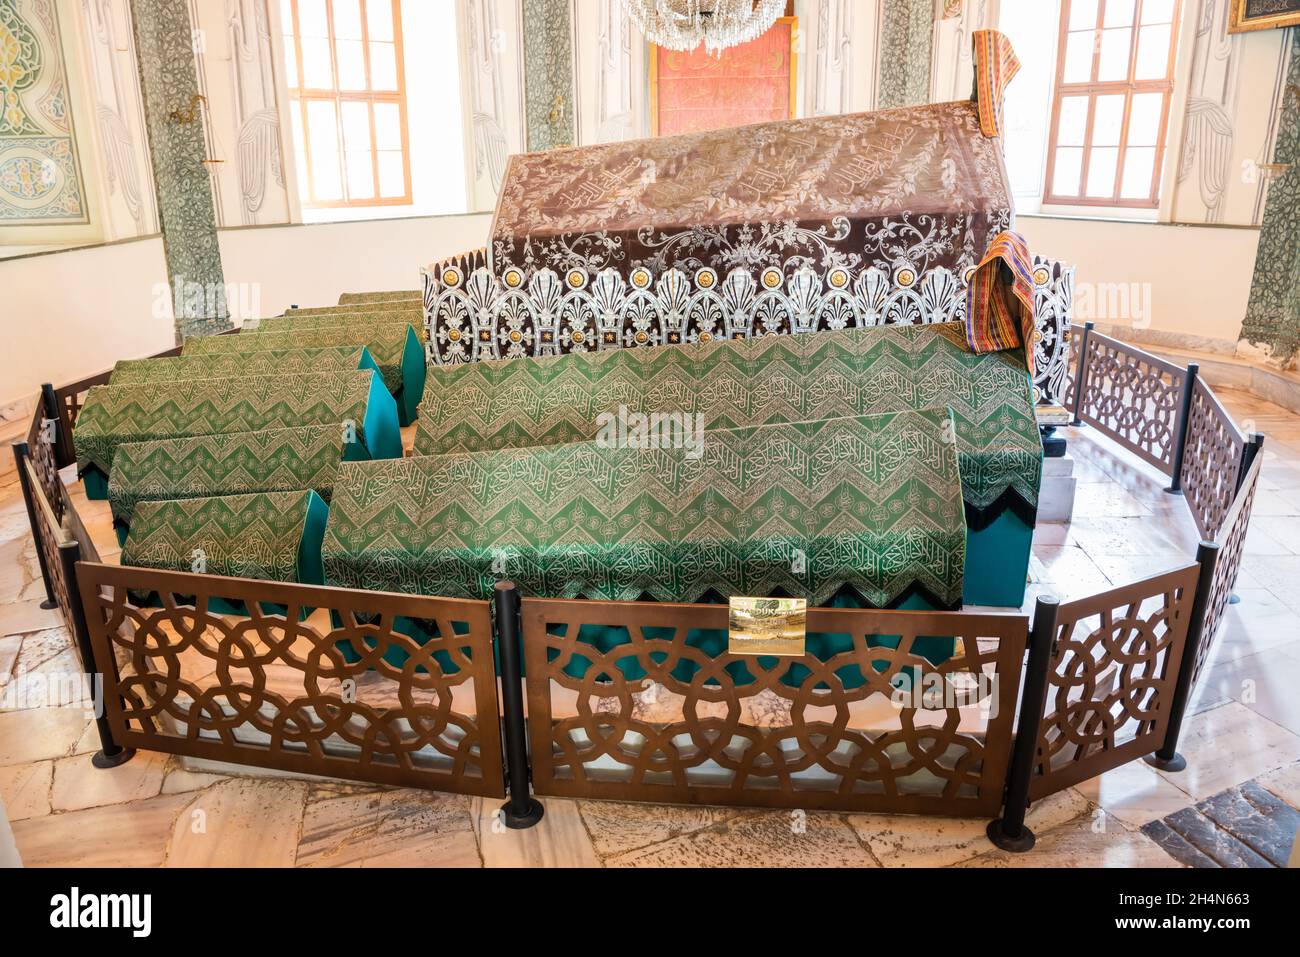 Bursa, Turkey – November 10, 2020. Interior view of the Tomb of Sultan Osman in Bursa Citadel historic area, with tombs of Sultan Osman, his sons and Stock Photo